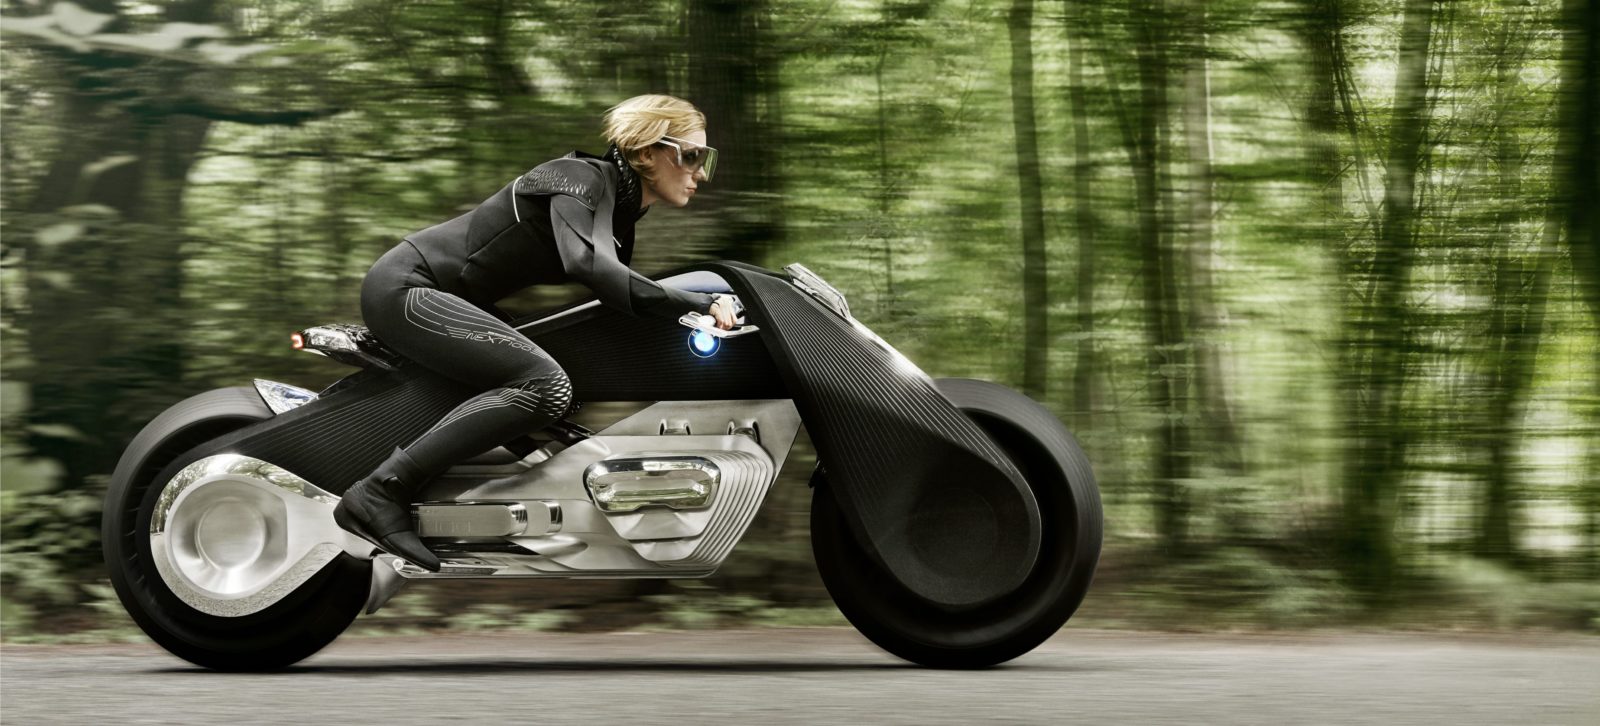 BMW unveils new self-balancing electric motorcycle concept amid rumored talks with Lit Motors